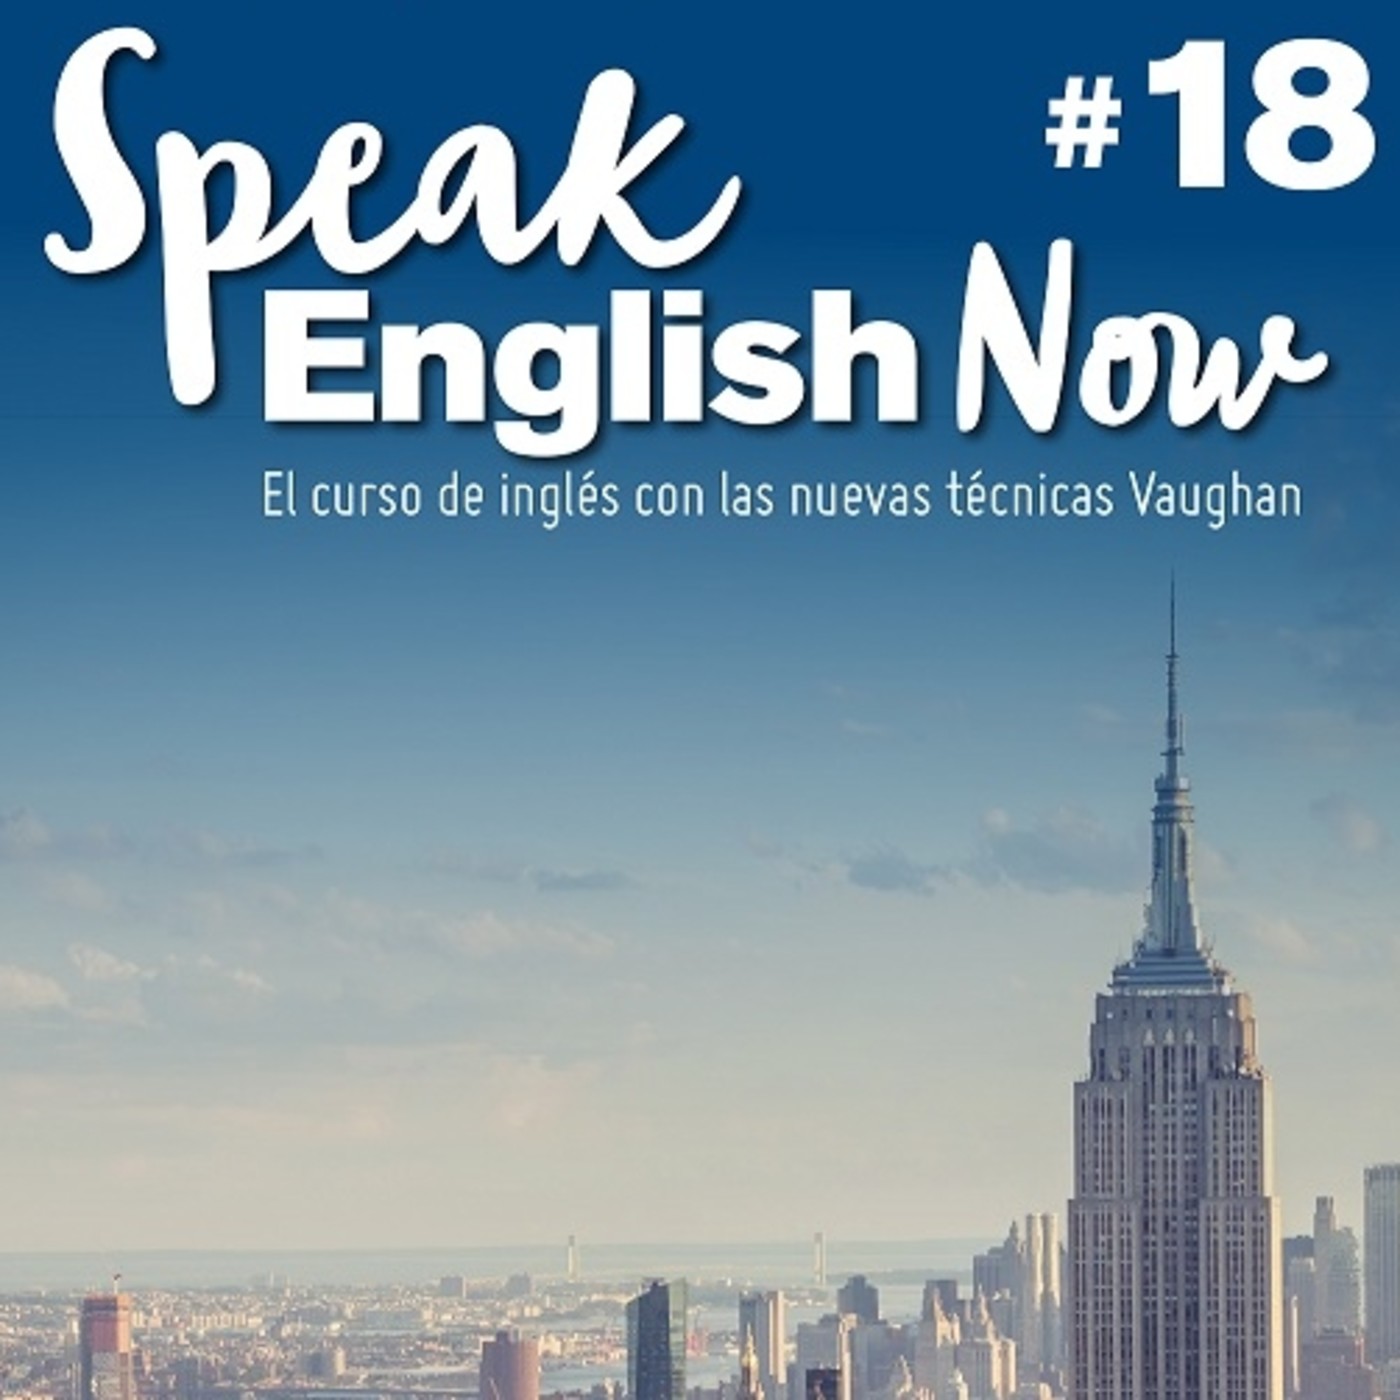 Speak English Now by Vaughan Libro 18